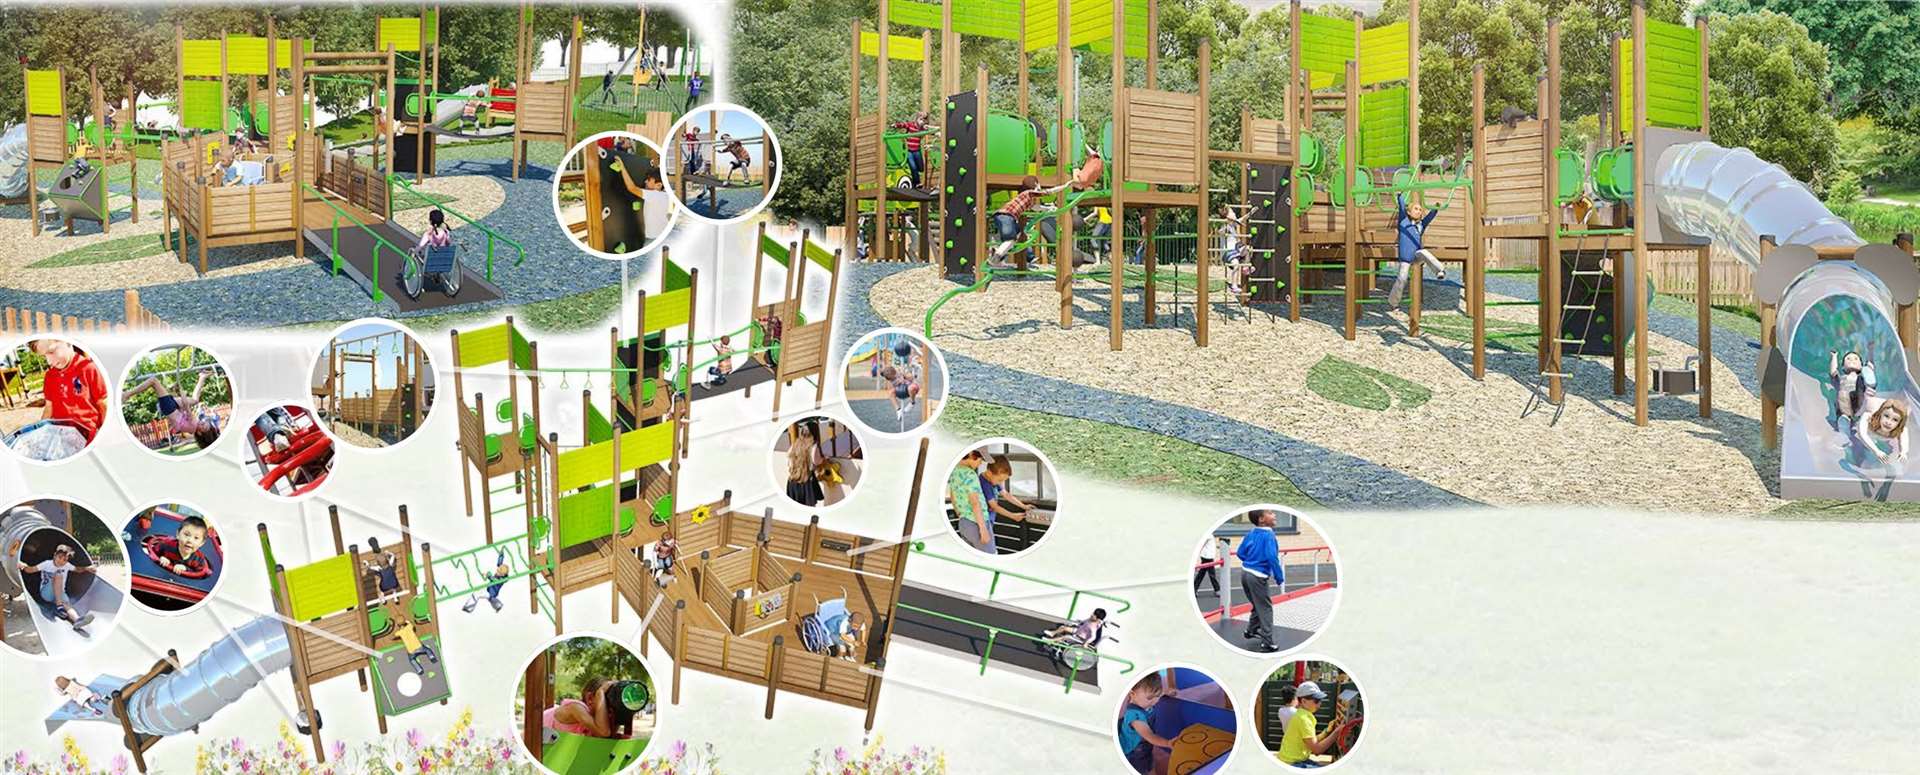 Capstone playground is getting a makeover